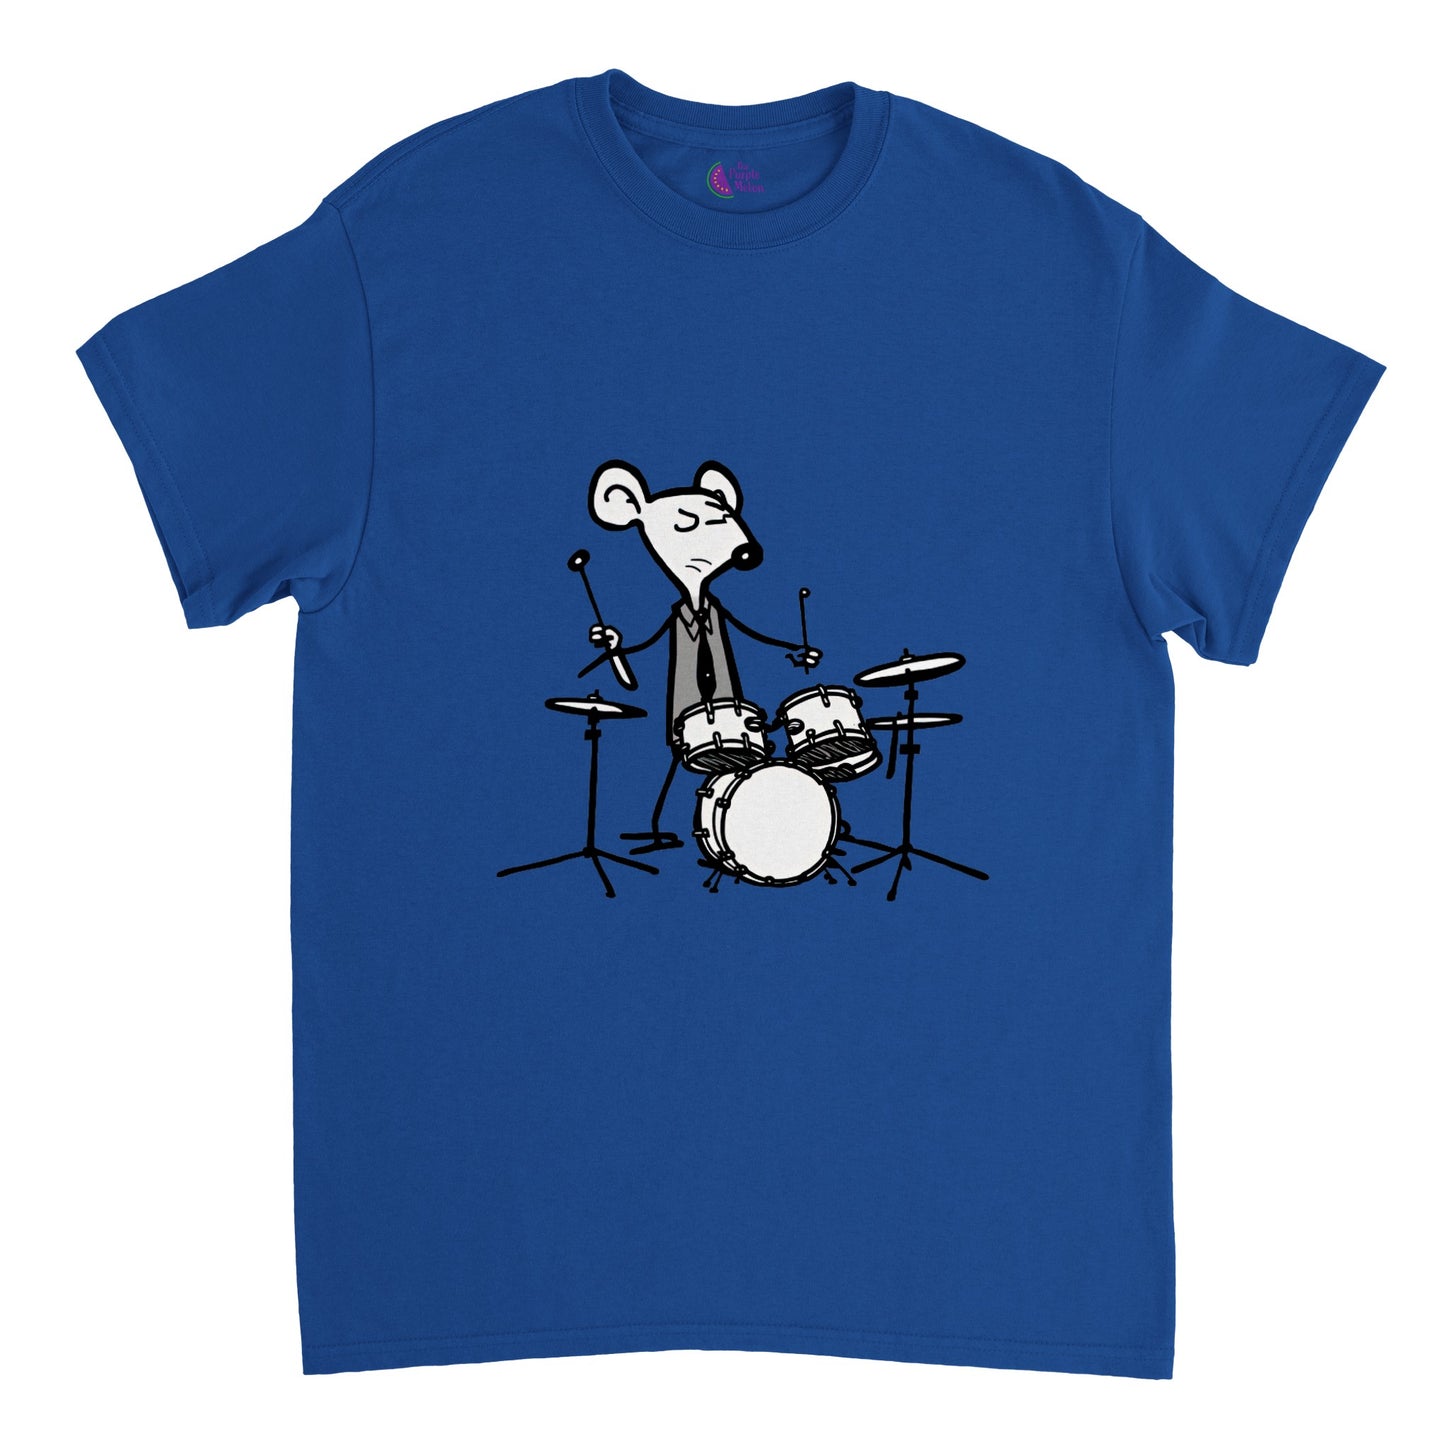 royal blue t-shirt with a mouse playing drums print